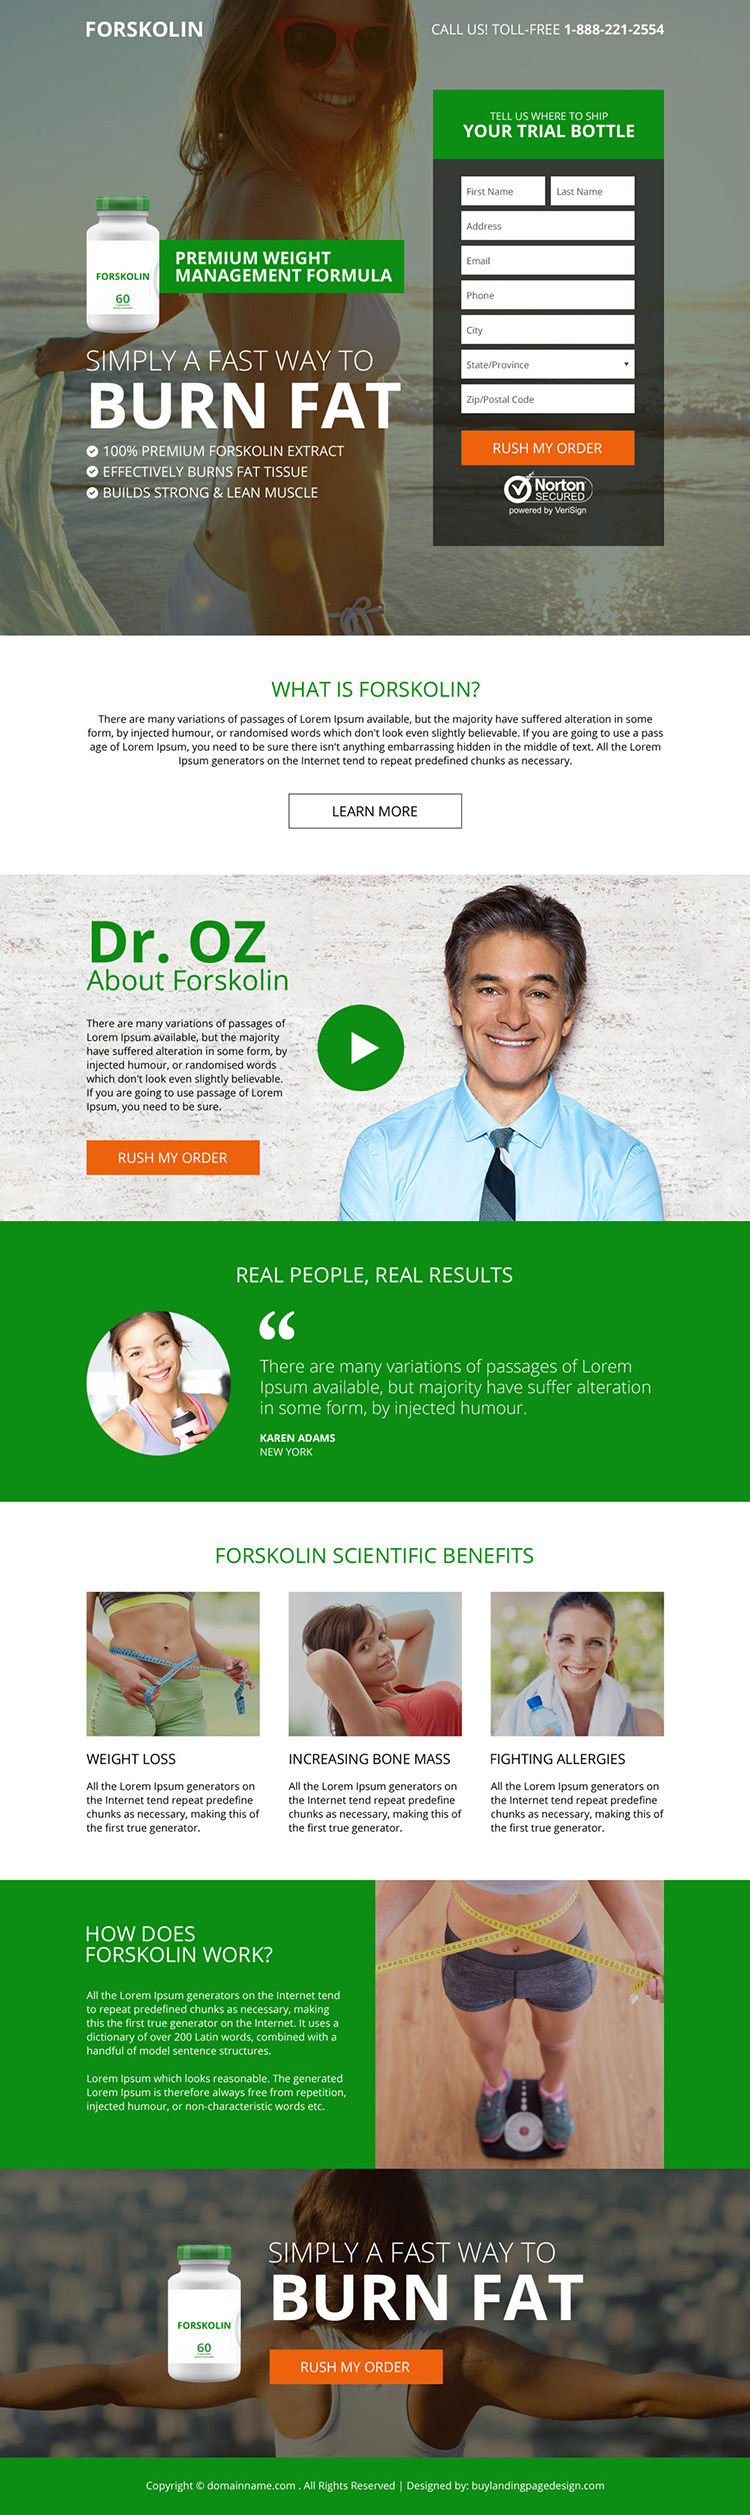 forskolin weight loss product selling responsive landing page